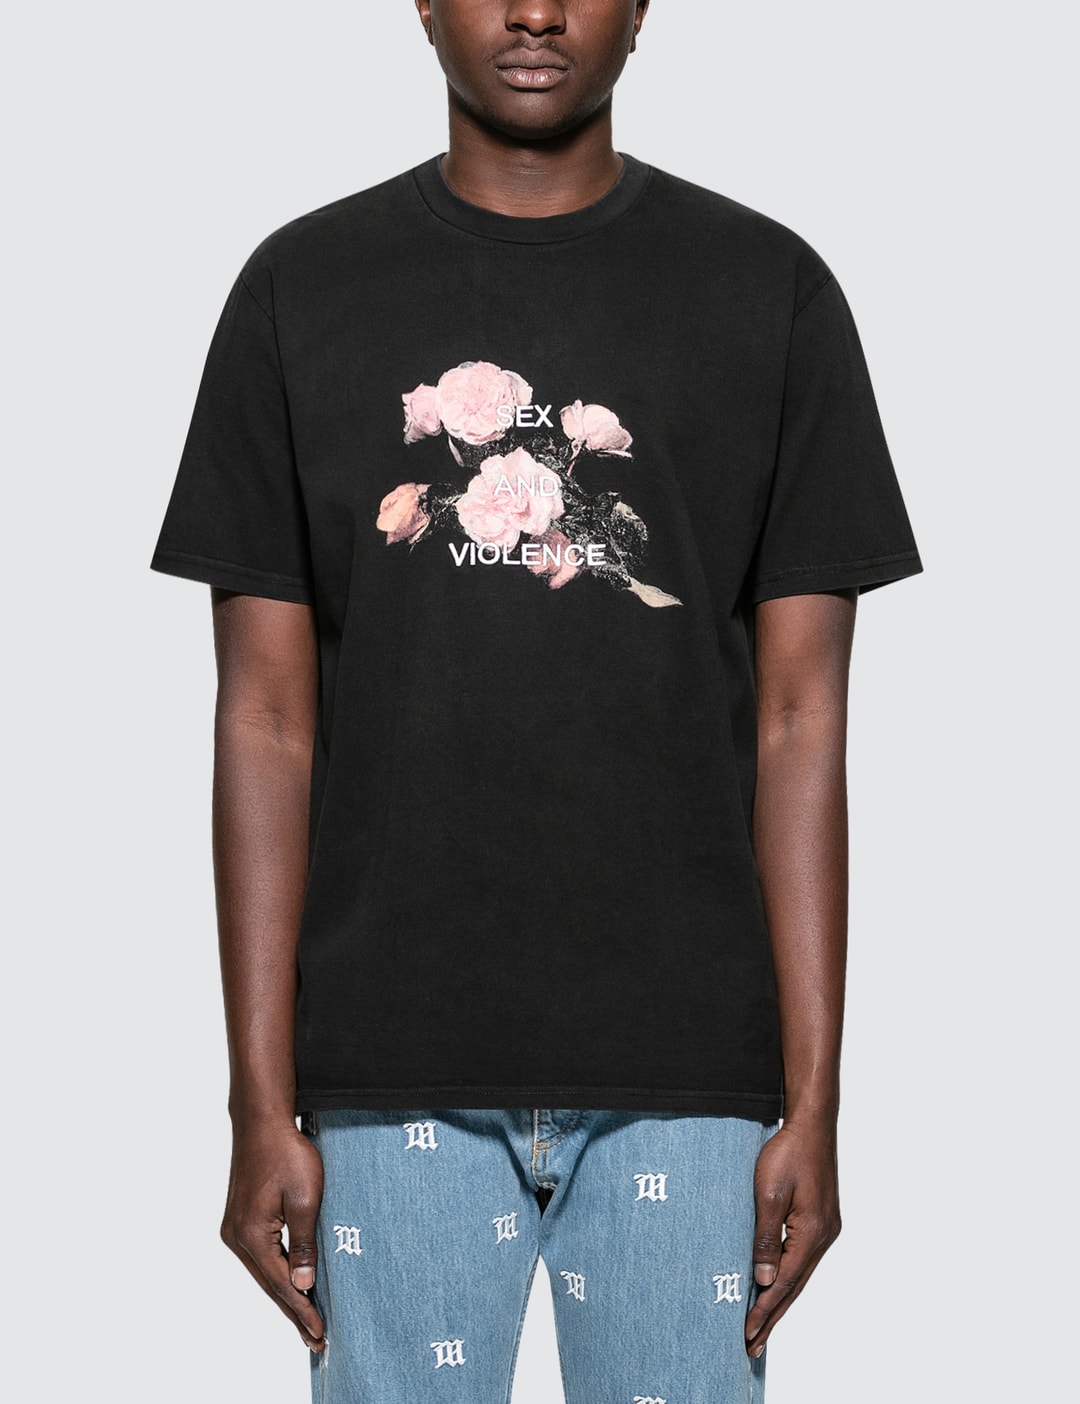 Misbhv - Sex & Violence T-Shirt | HBX - Globally Curated Fashion and ...